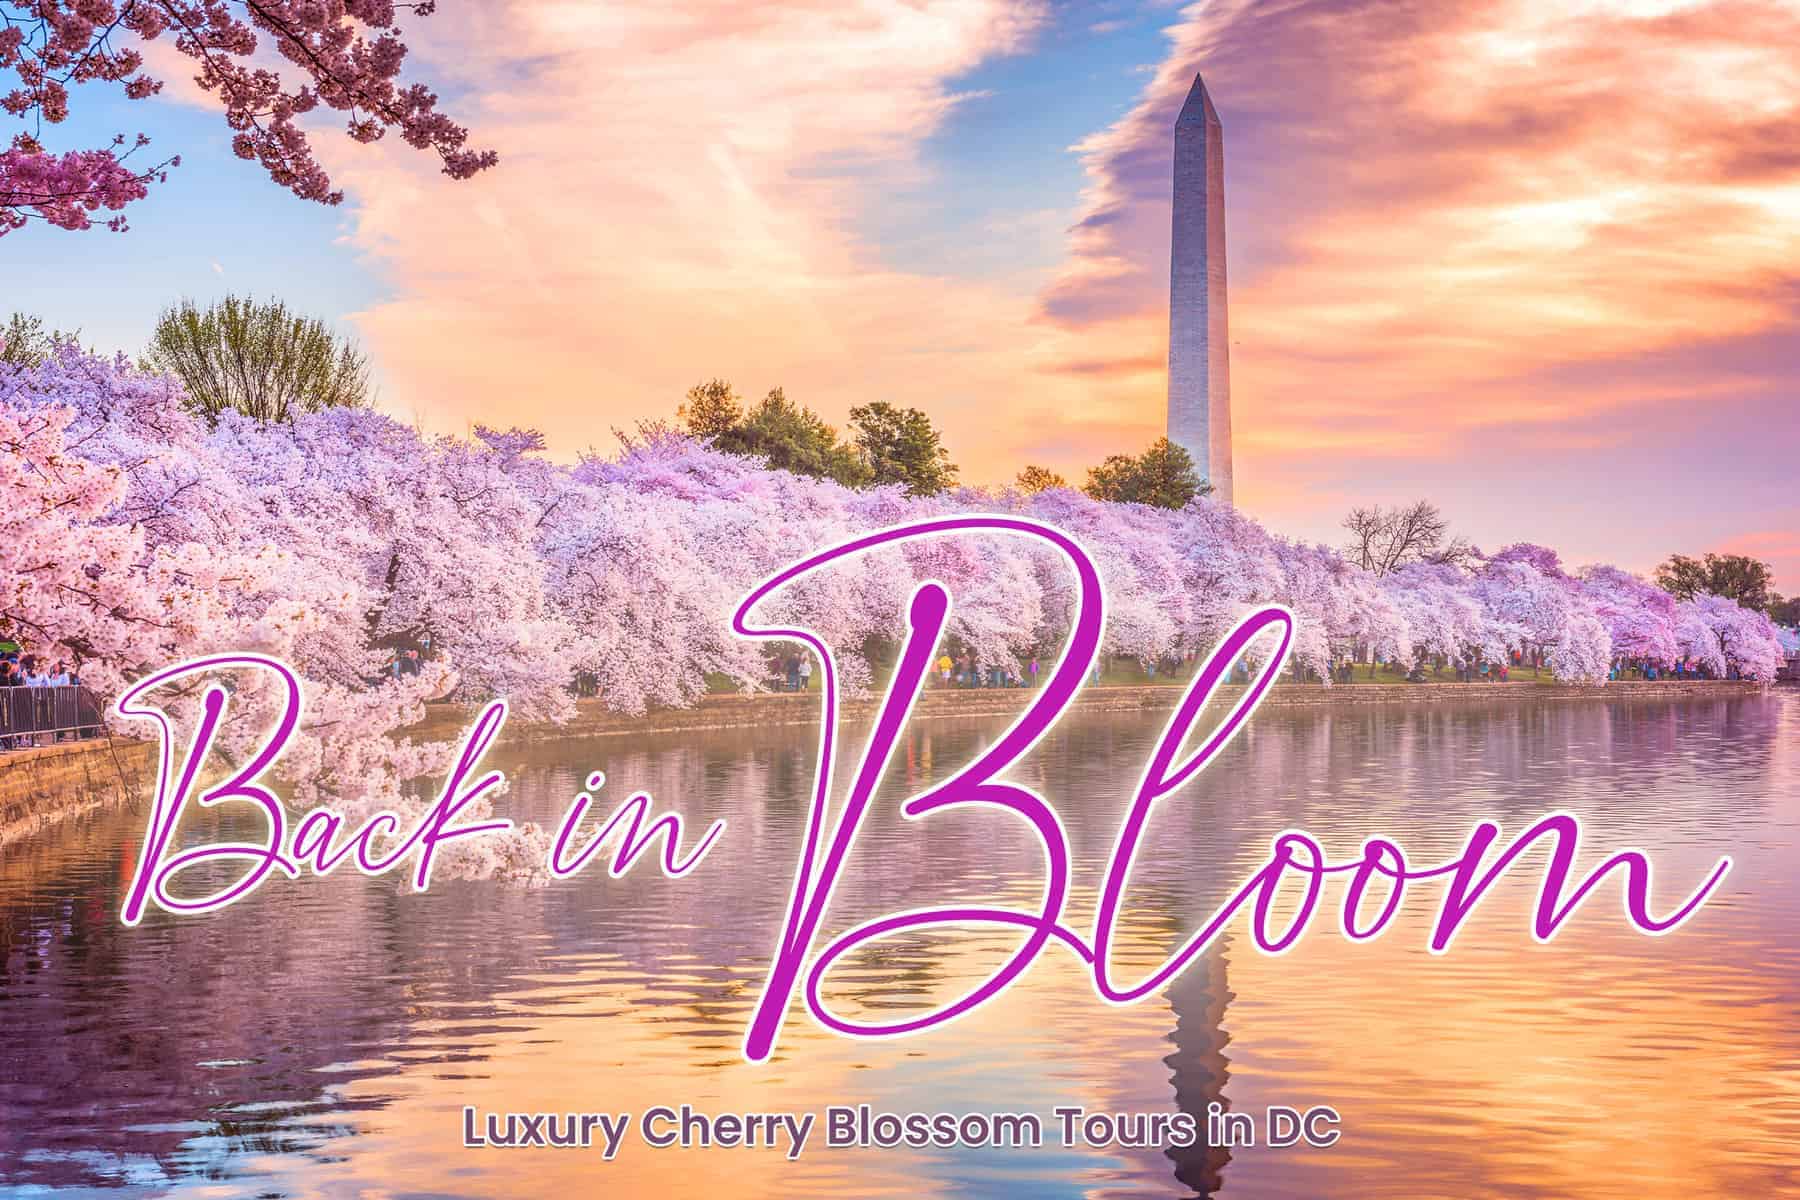 [Press Release] Beyond Times Square Launches “Back in Bloom” DC Travel Experiences for Cherry Blossom Season 2023